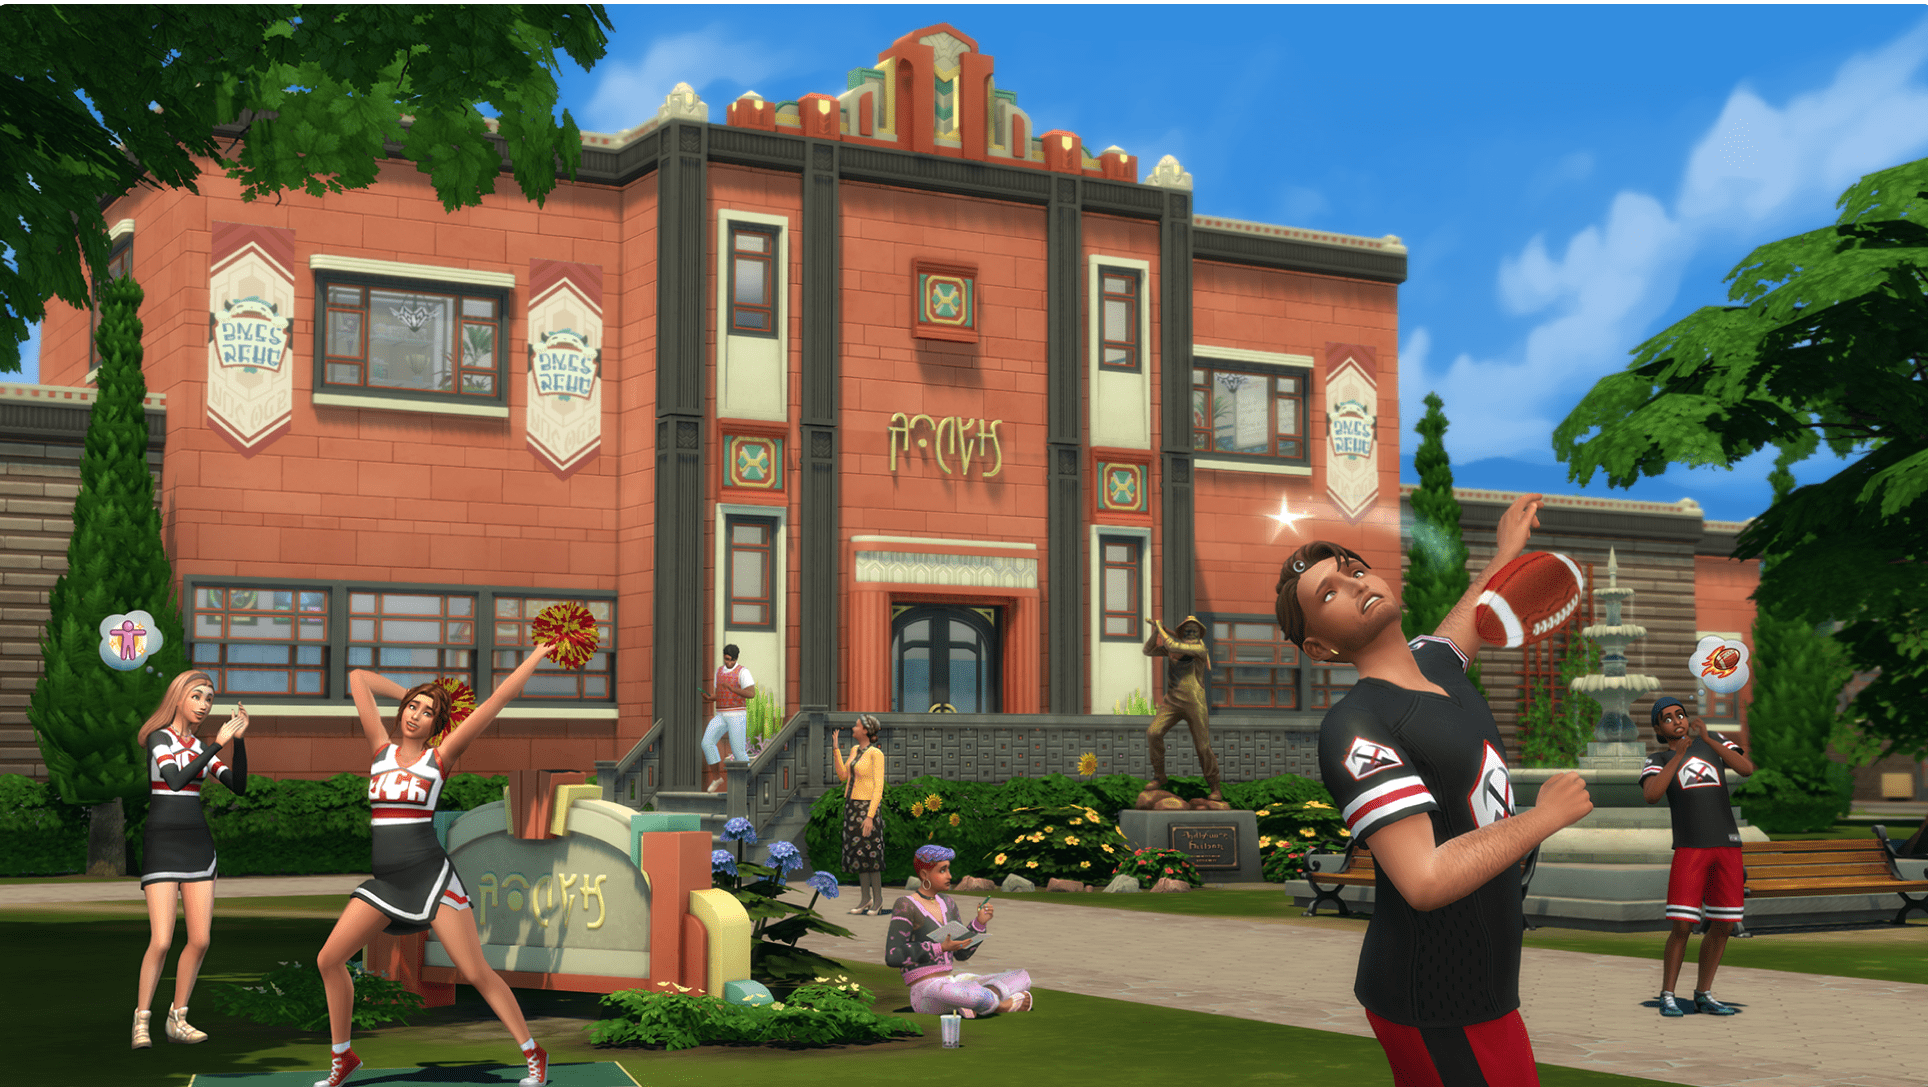 The Sims 4: High School Years - a bunch of teens hang outside their high school, engaging in antics. One Sim in the foreground just took a football to the chin, while cheerleader Sims practice on the other side of the yard.